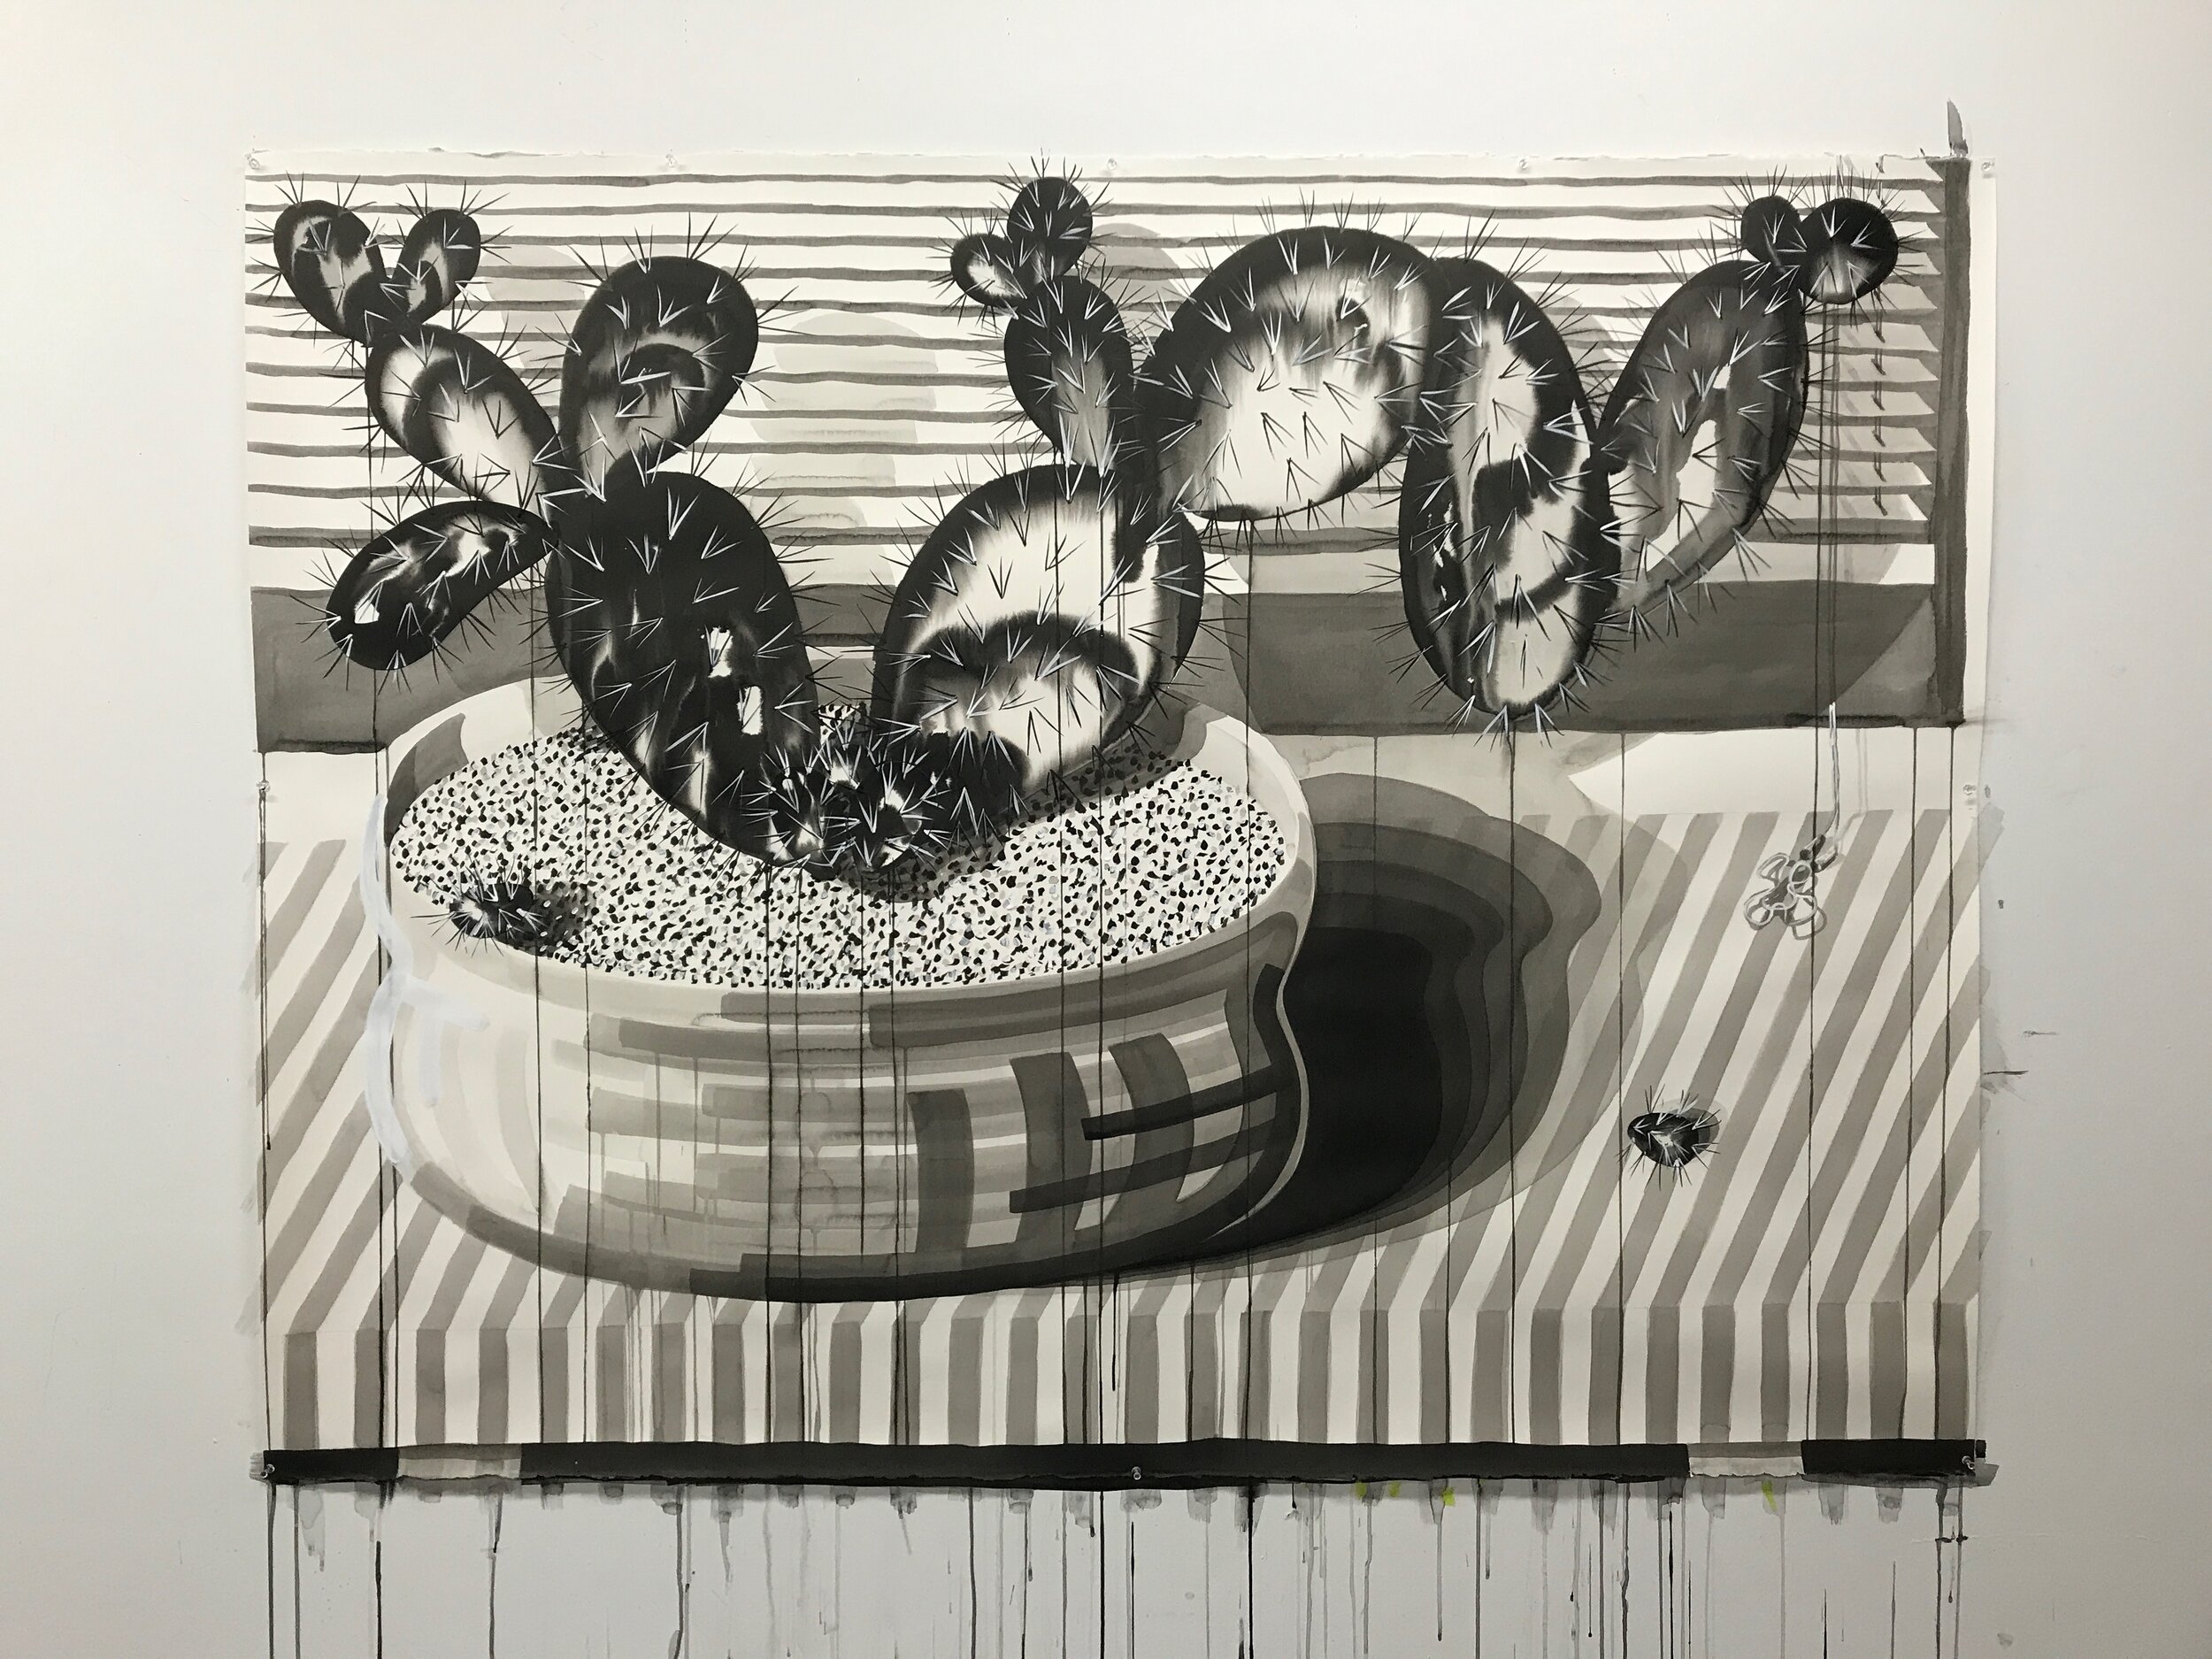 Untitled (memory of a cactus rehearsing an act), 2018, ink, flashe, and collage on paper, 51 x 68 inches